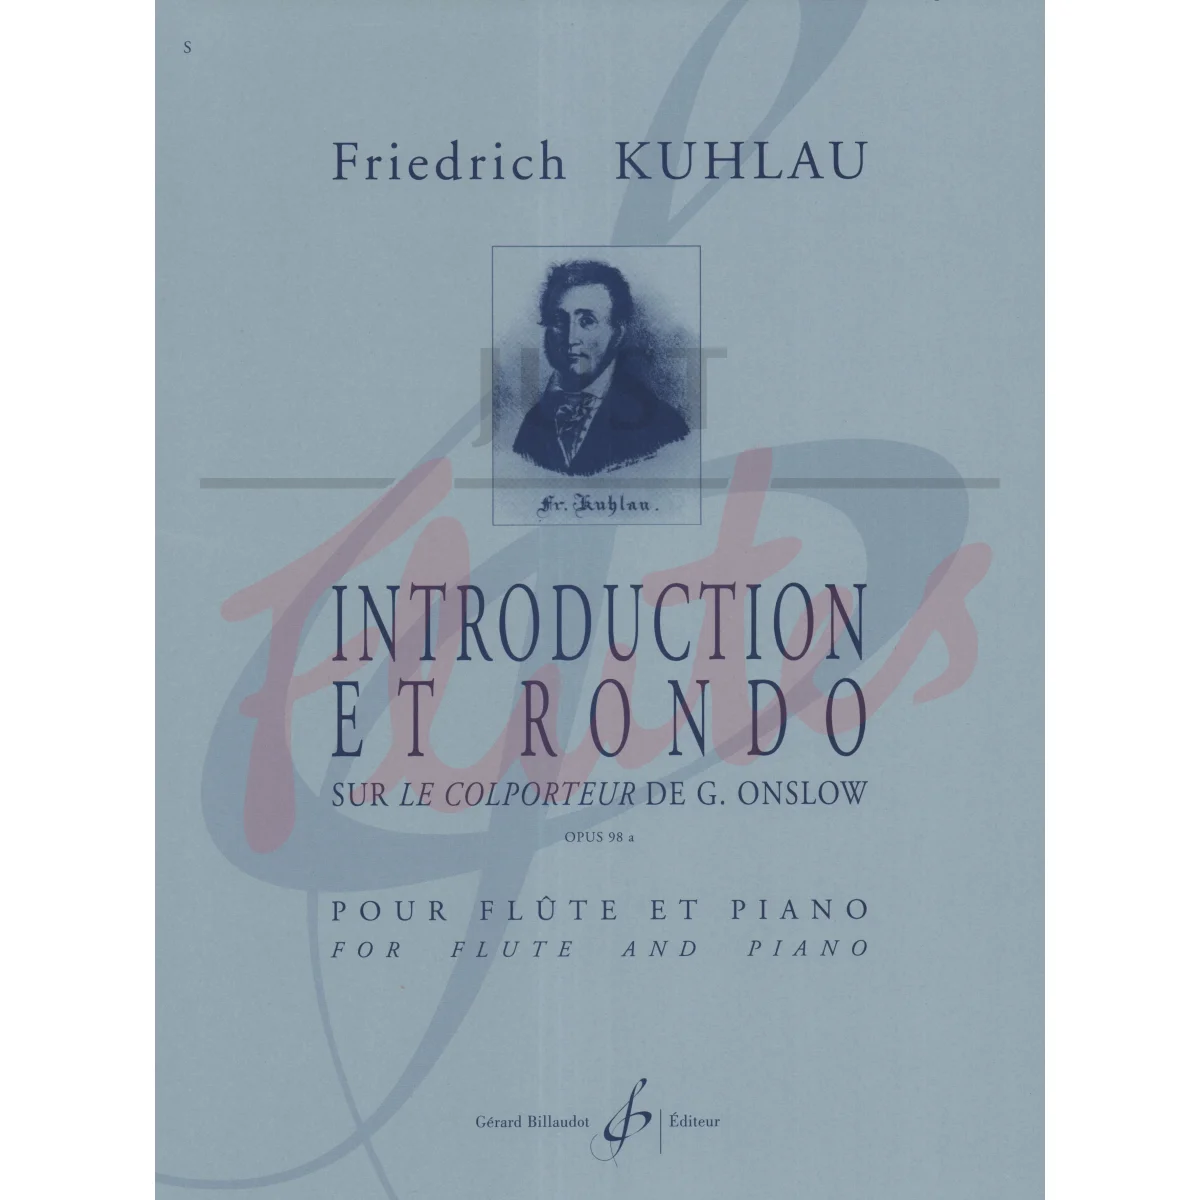 Introduction and Rondo for Flute and Piano